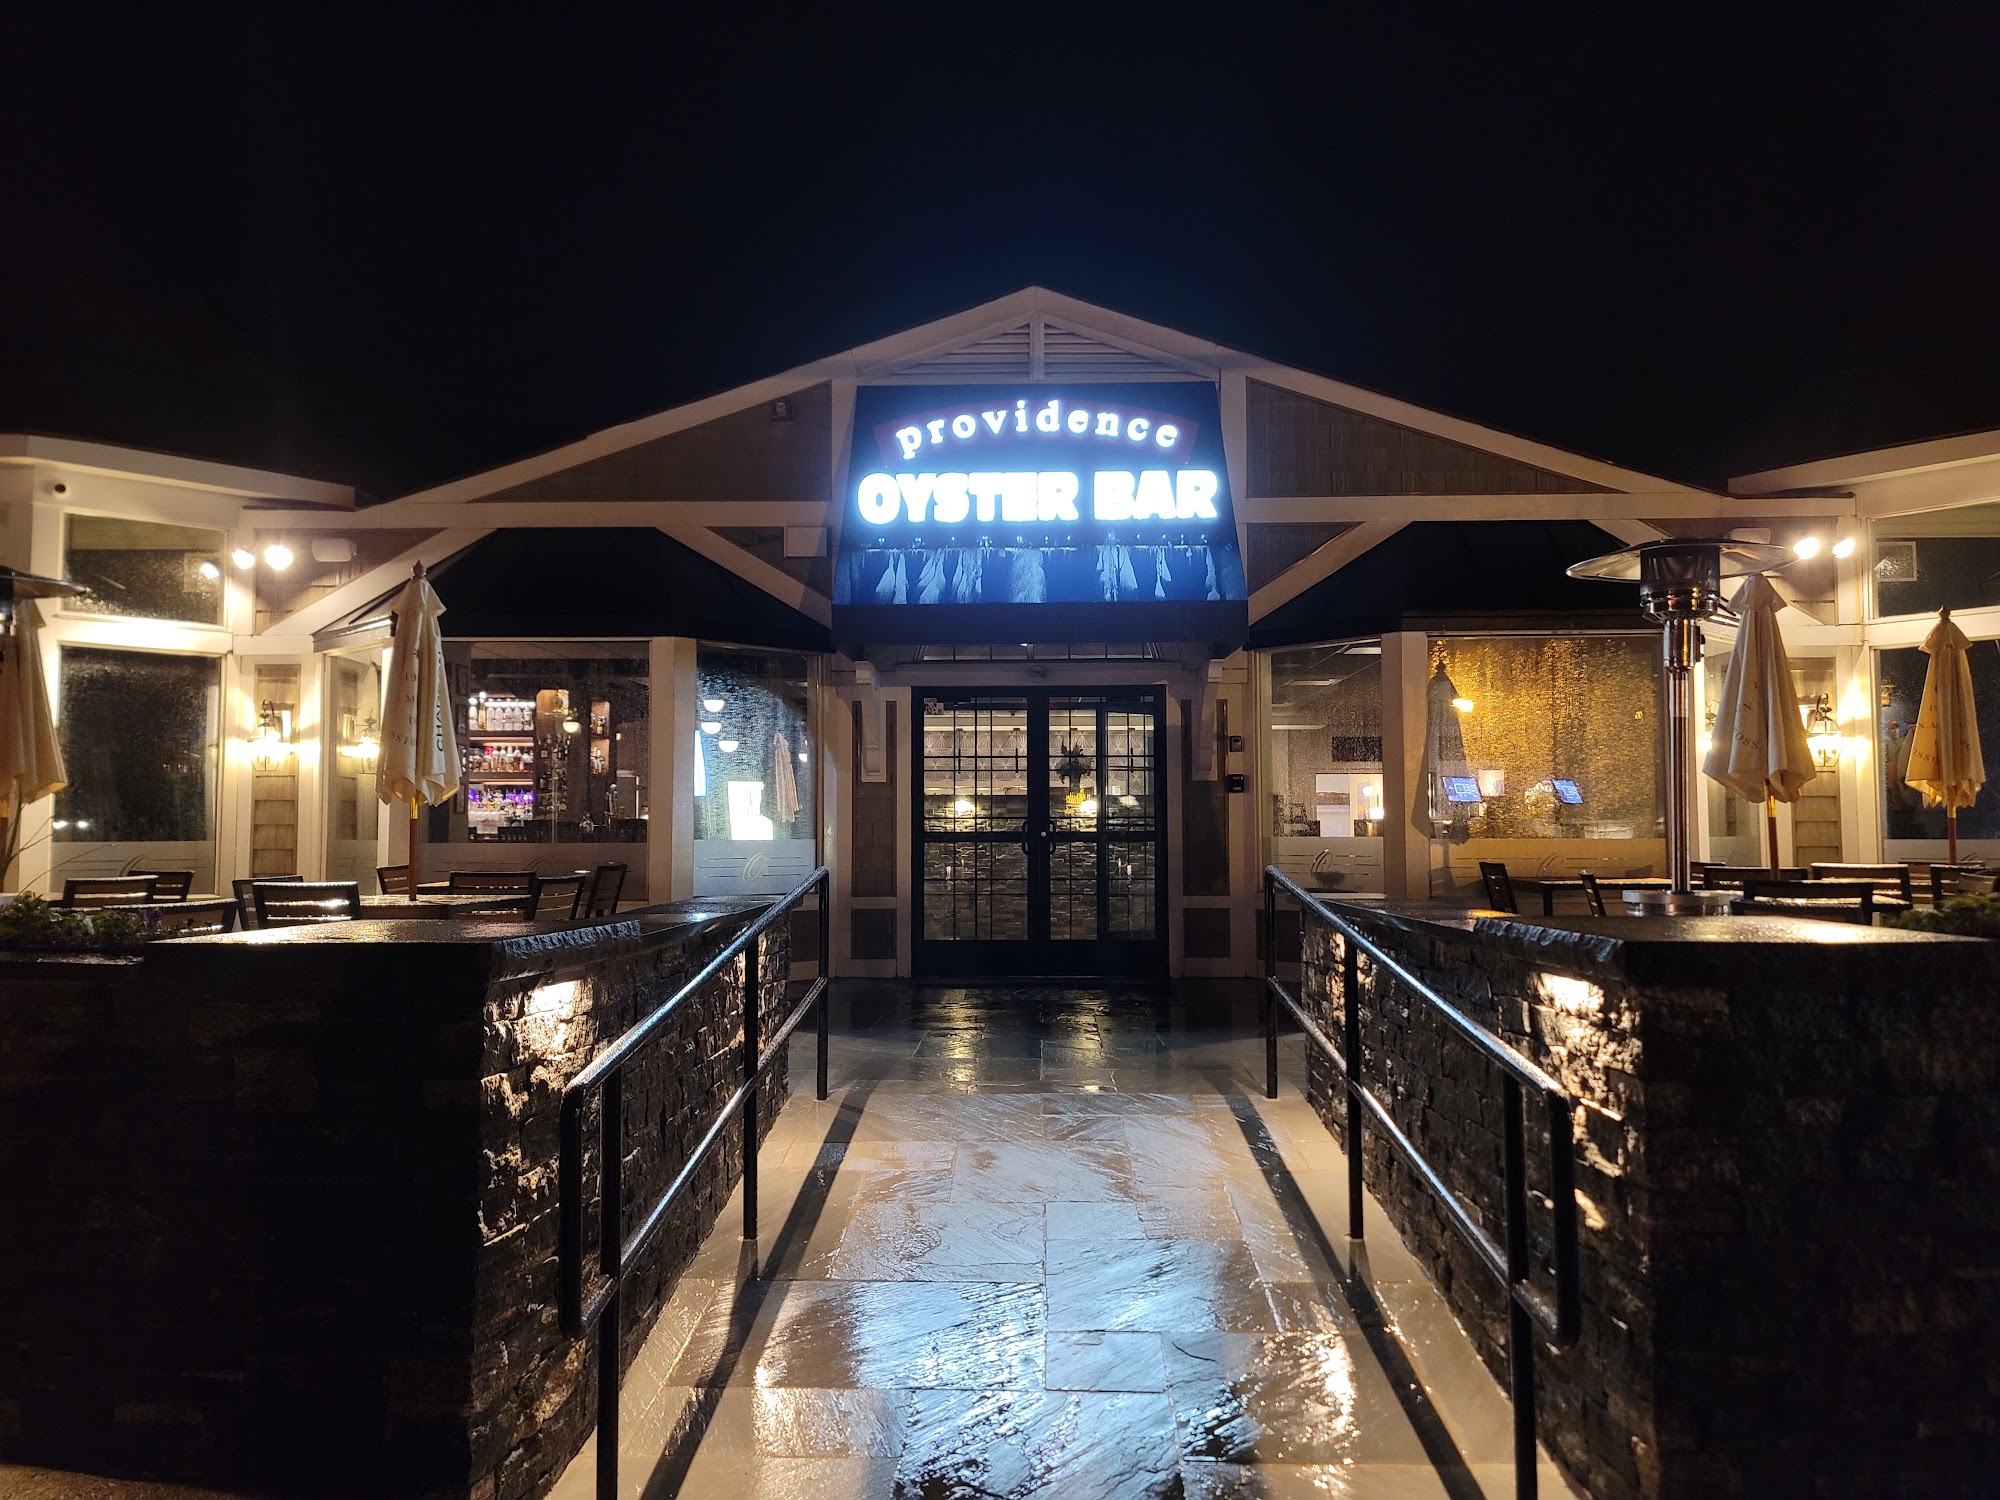 Providence Oyster Bar East Greenwich